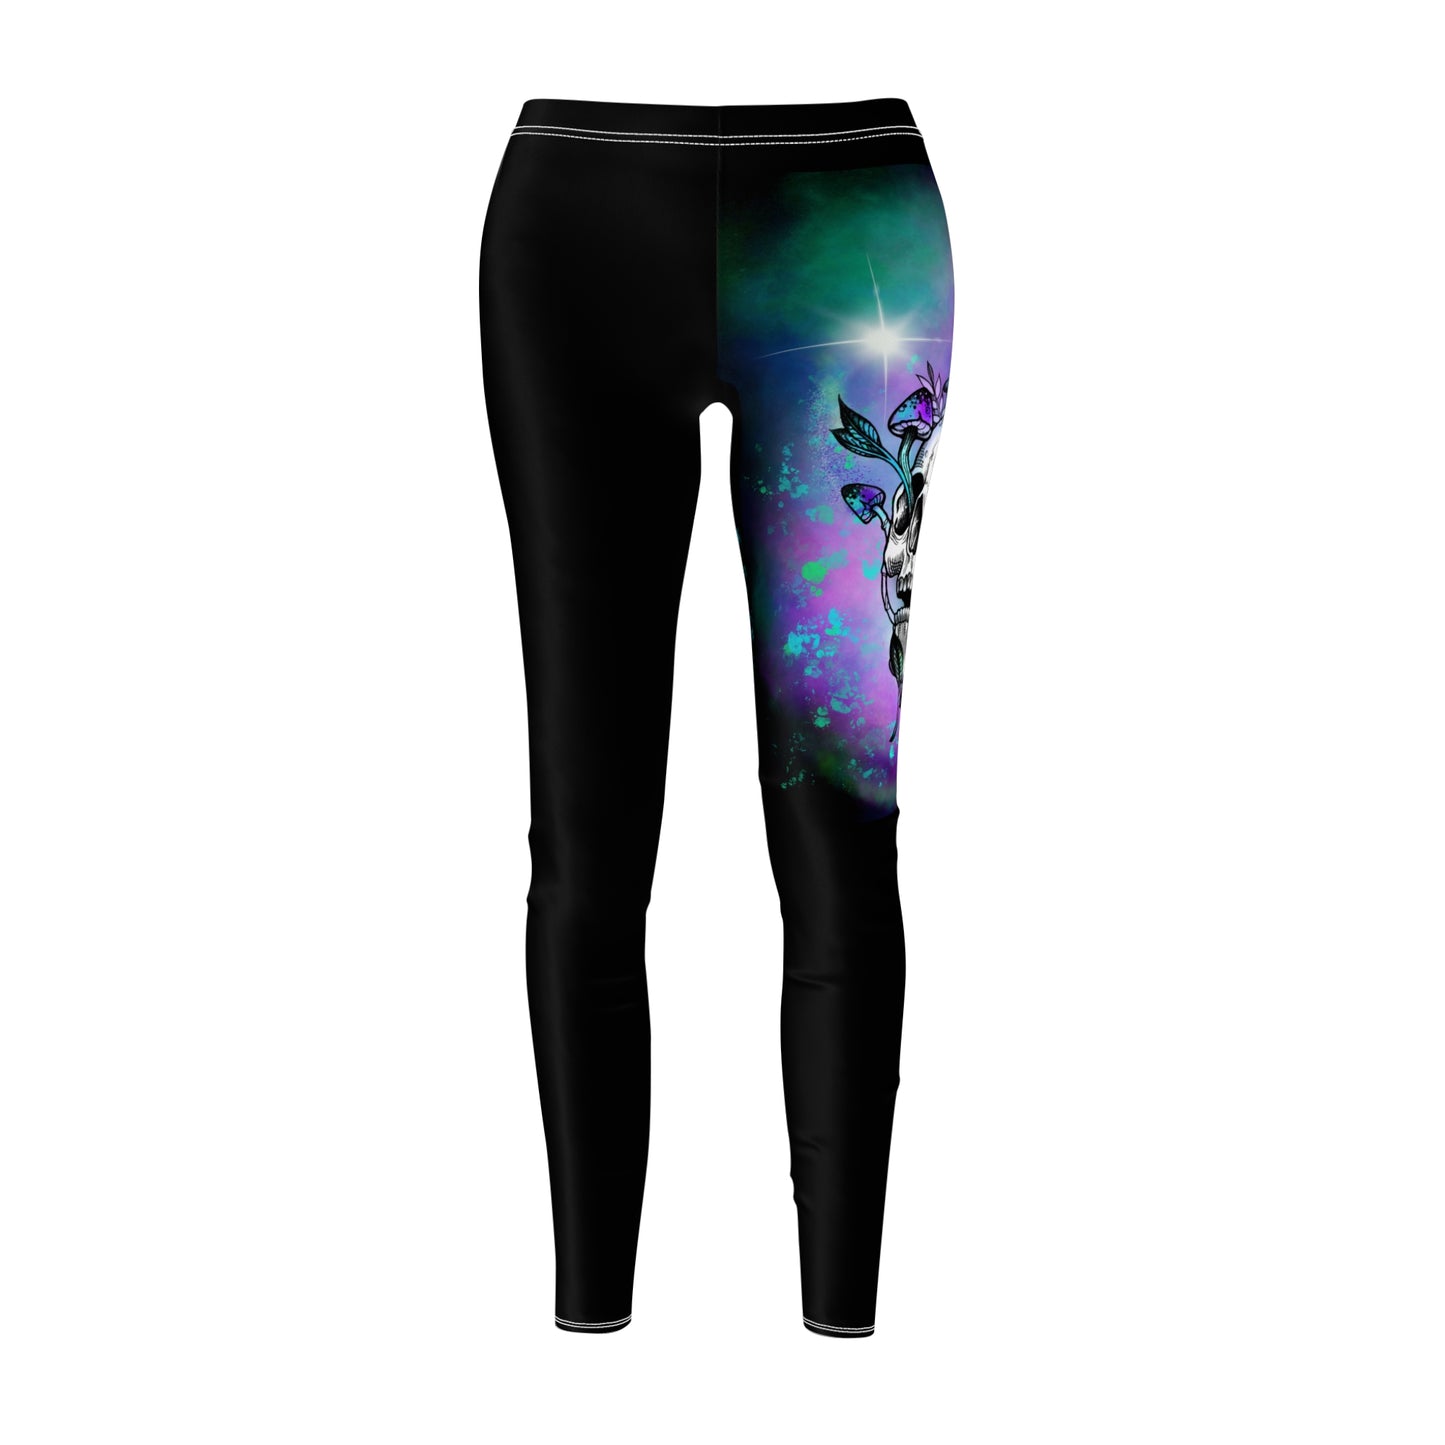 Inked Out Skull & Shrooms Women's Cut & Sew Casual Leggings (AOP)